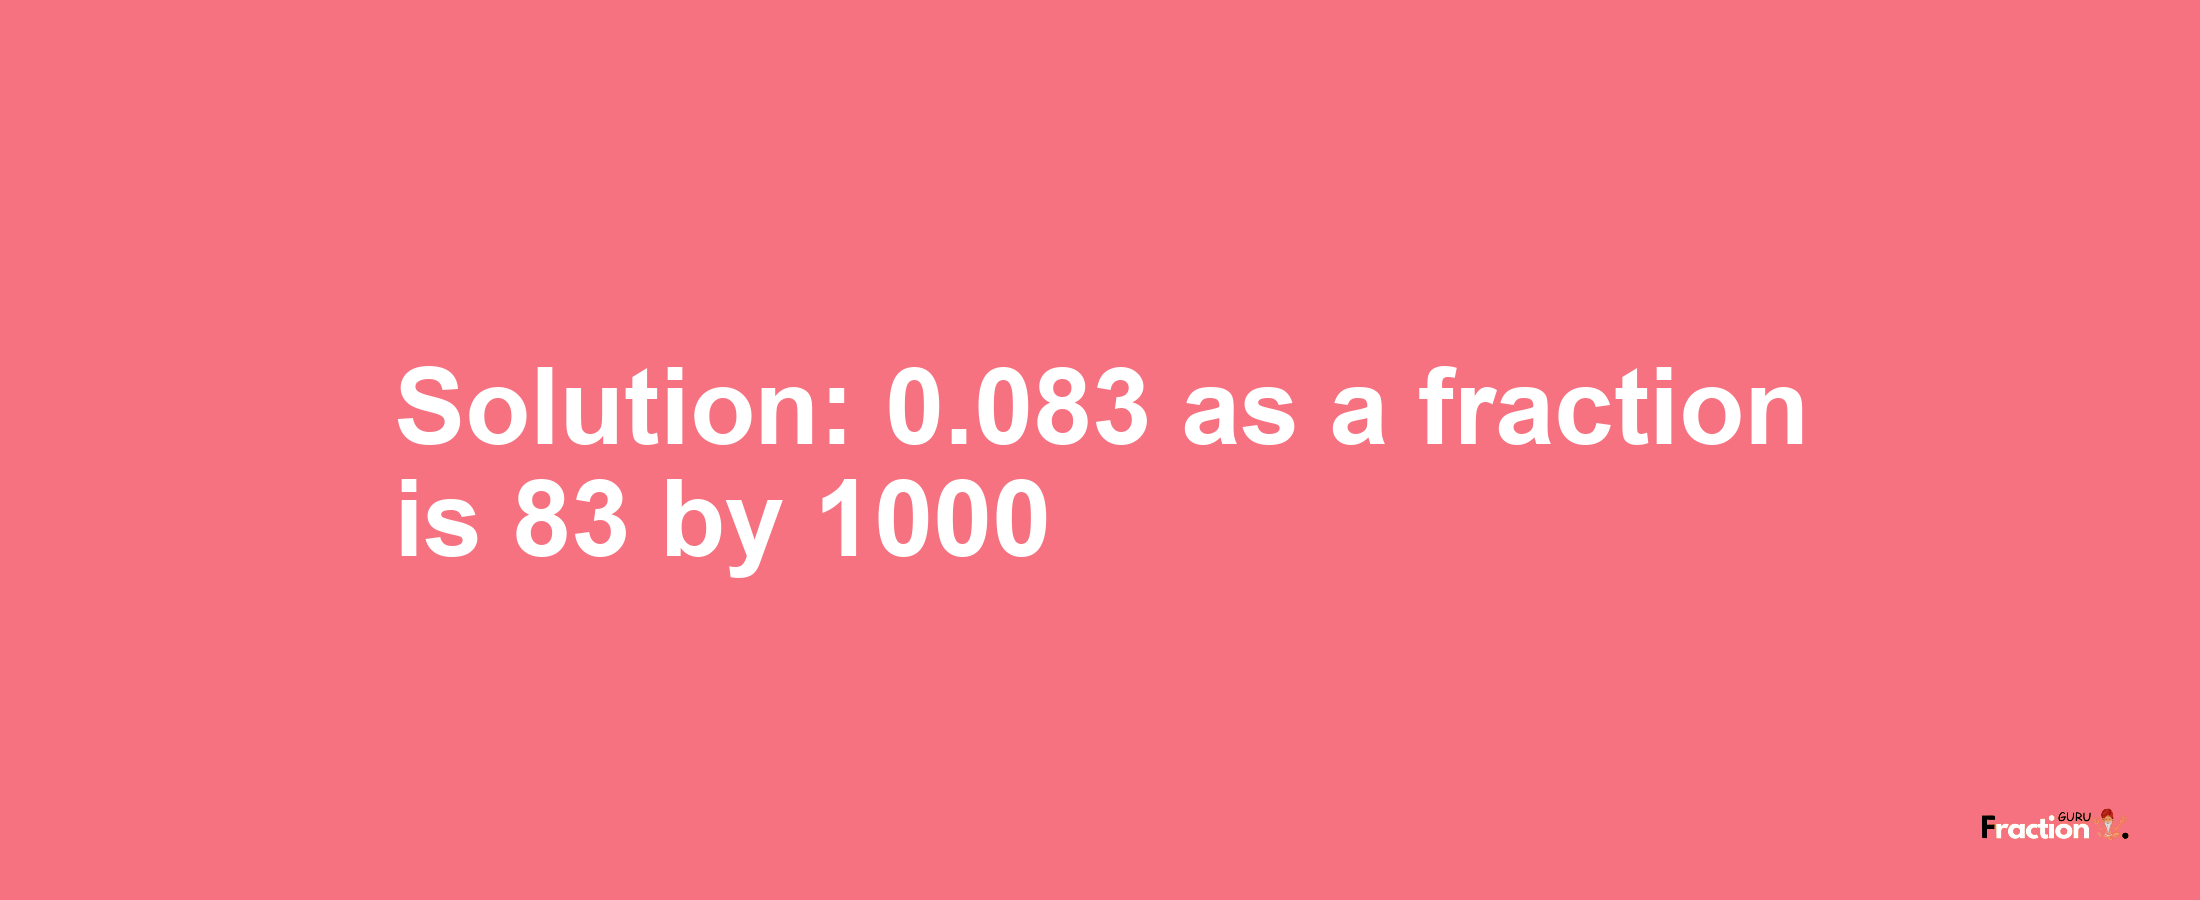 Solution:0.083 as a fraction is 83/1000